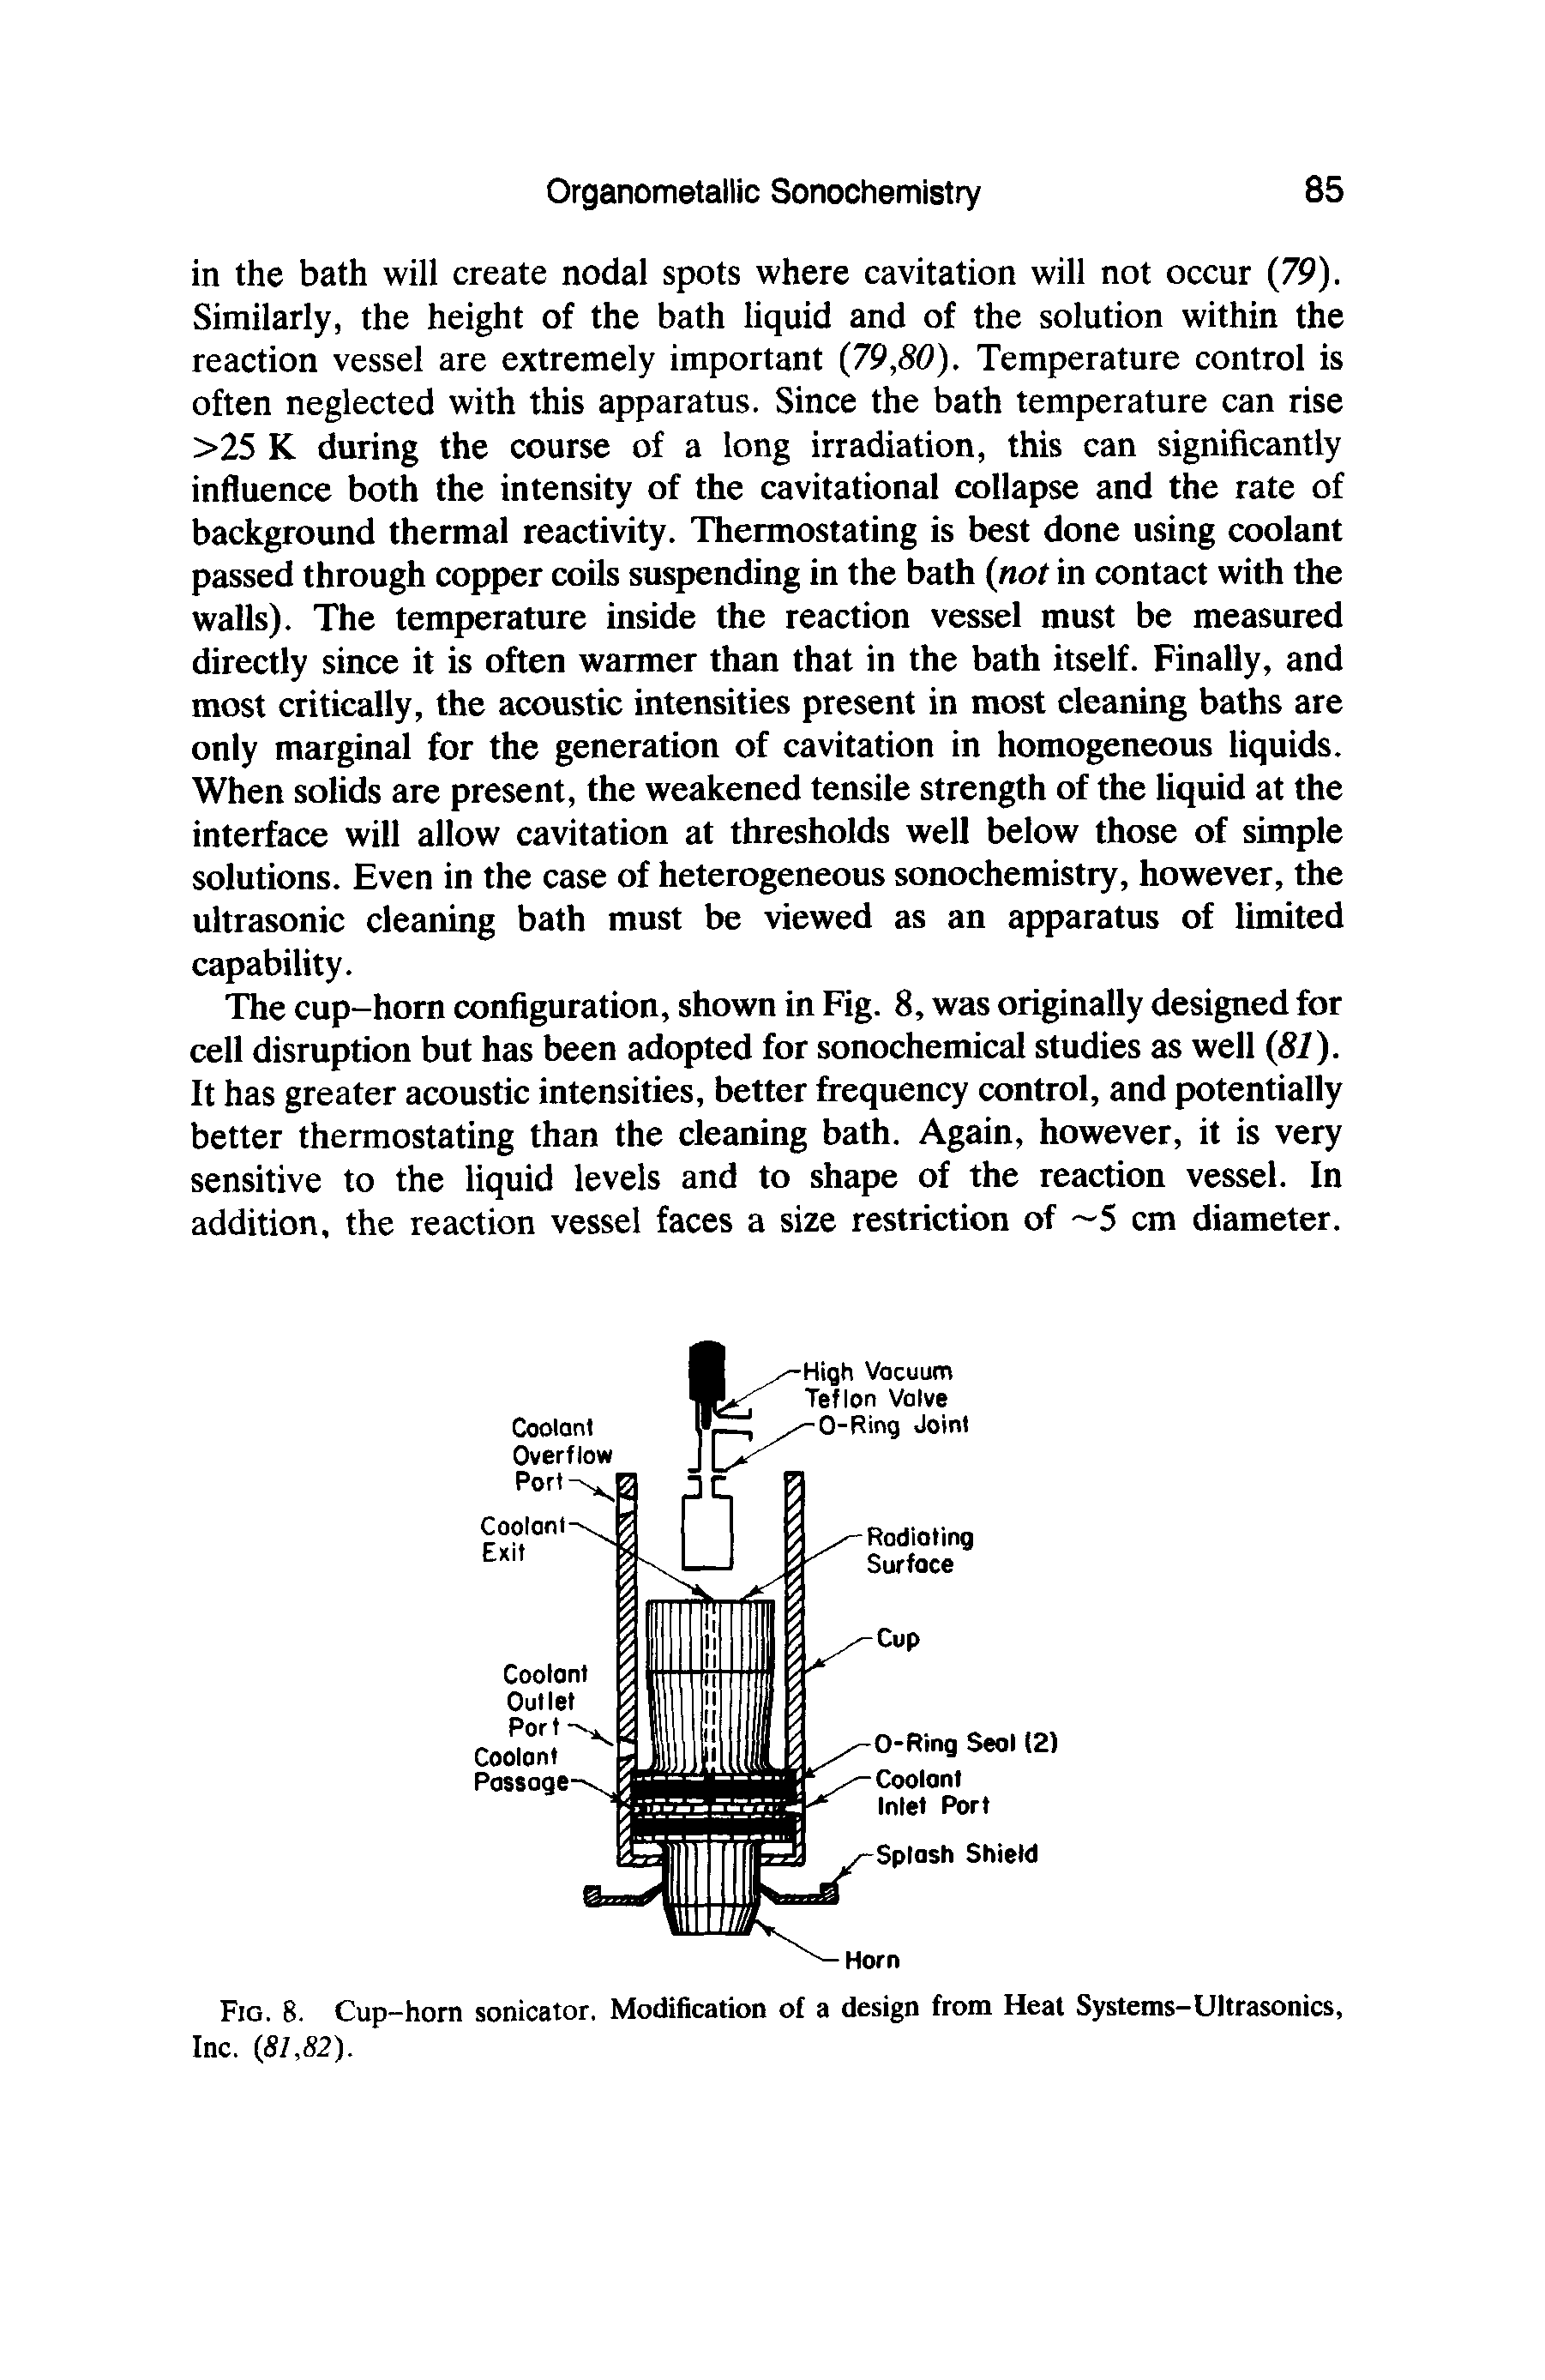 Fig. 8. Cup-horn sonicator. Modification of a design from Heat Systems-Ultrasonics, Inc. (81,82).